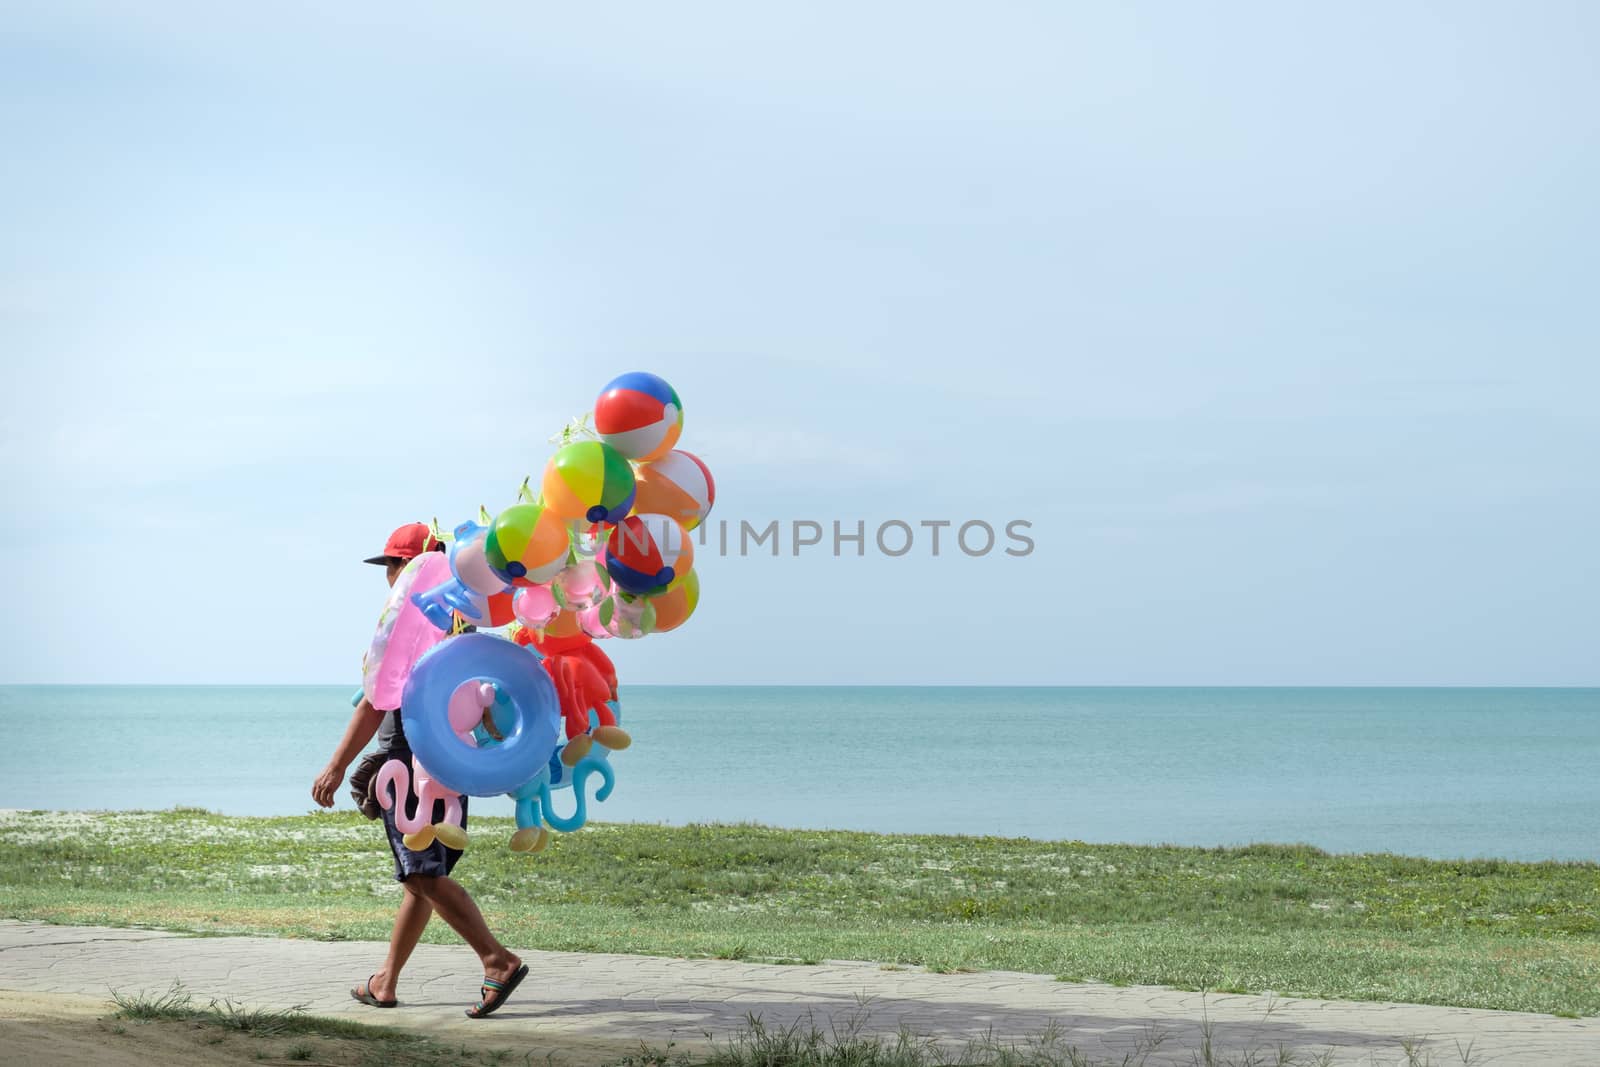 Balloon salesman by the sea with copy space to write.